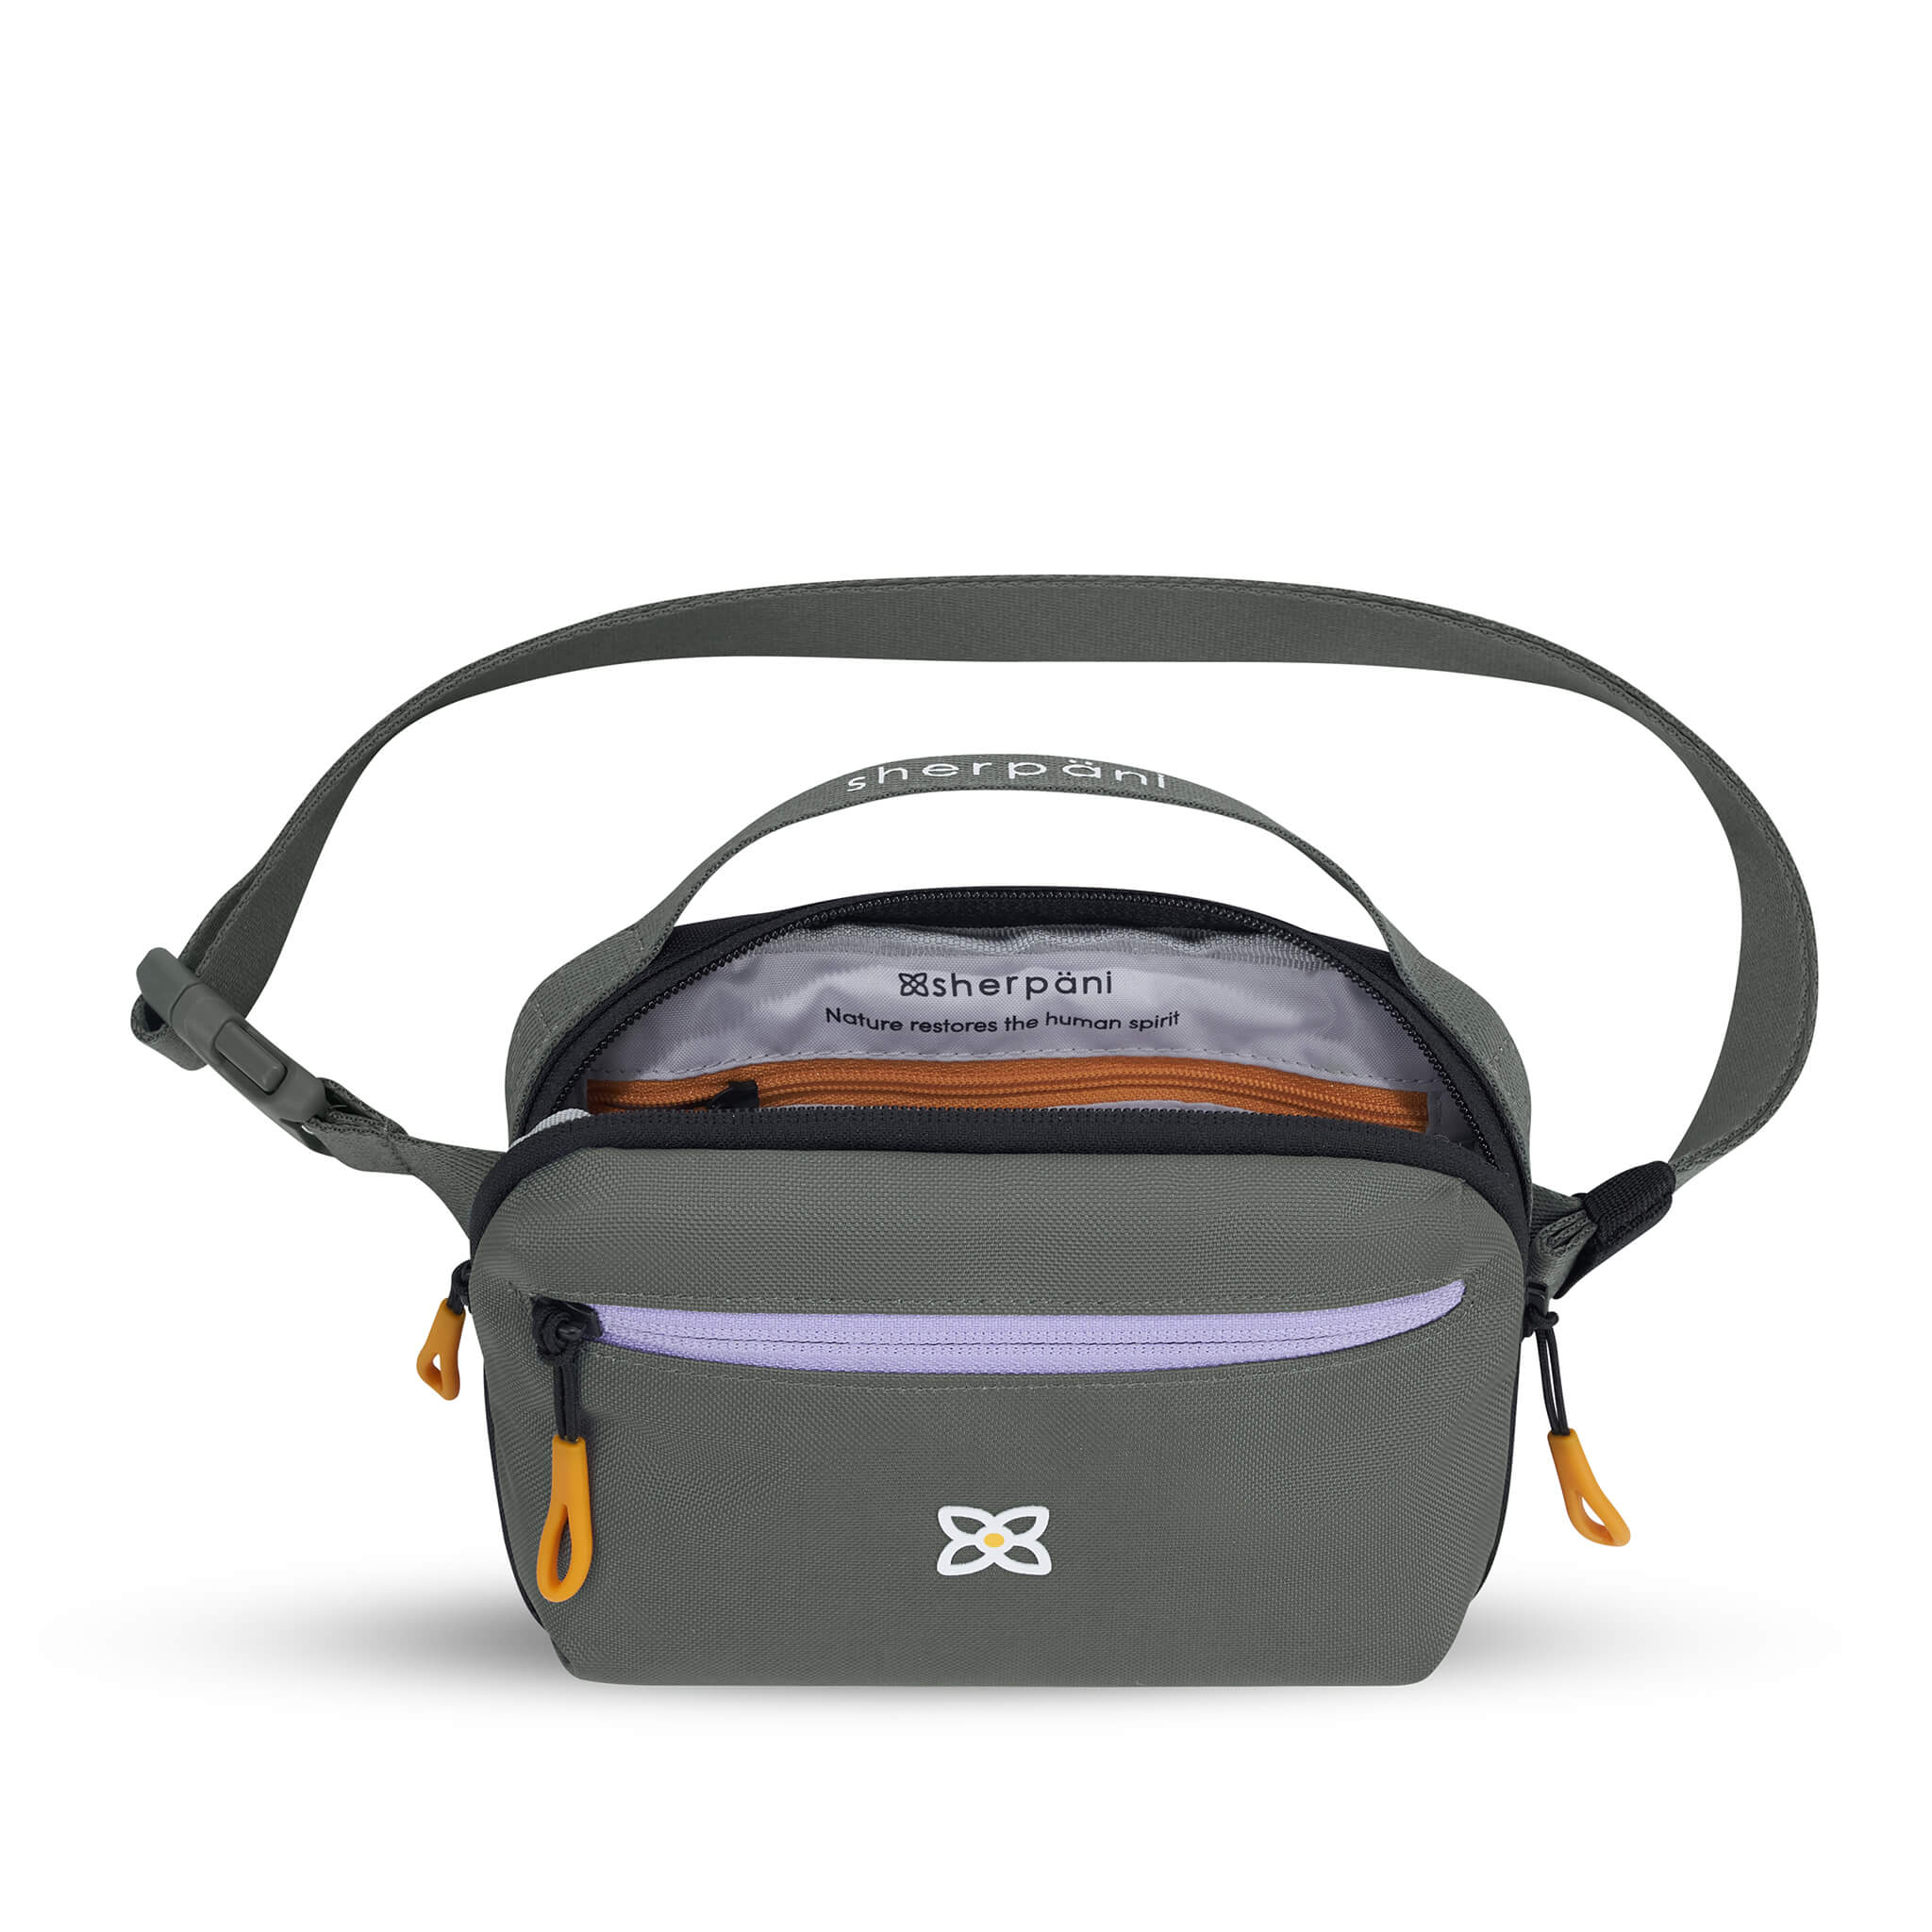 Top view of Sherpani's waist pack, the Hyk in Juniper. The main bag compartment is open to reveal a light gray interior and inside zipper pocket. 